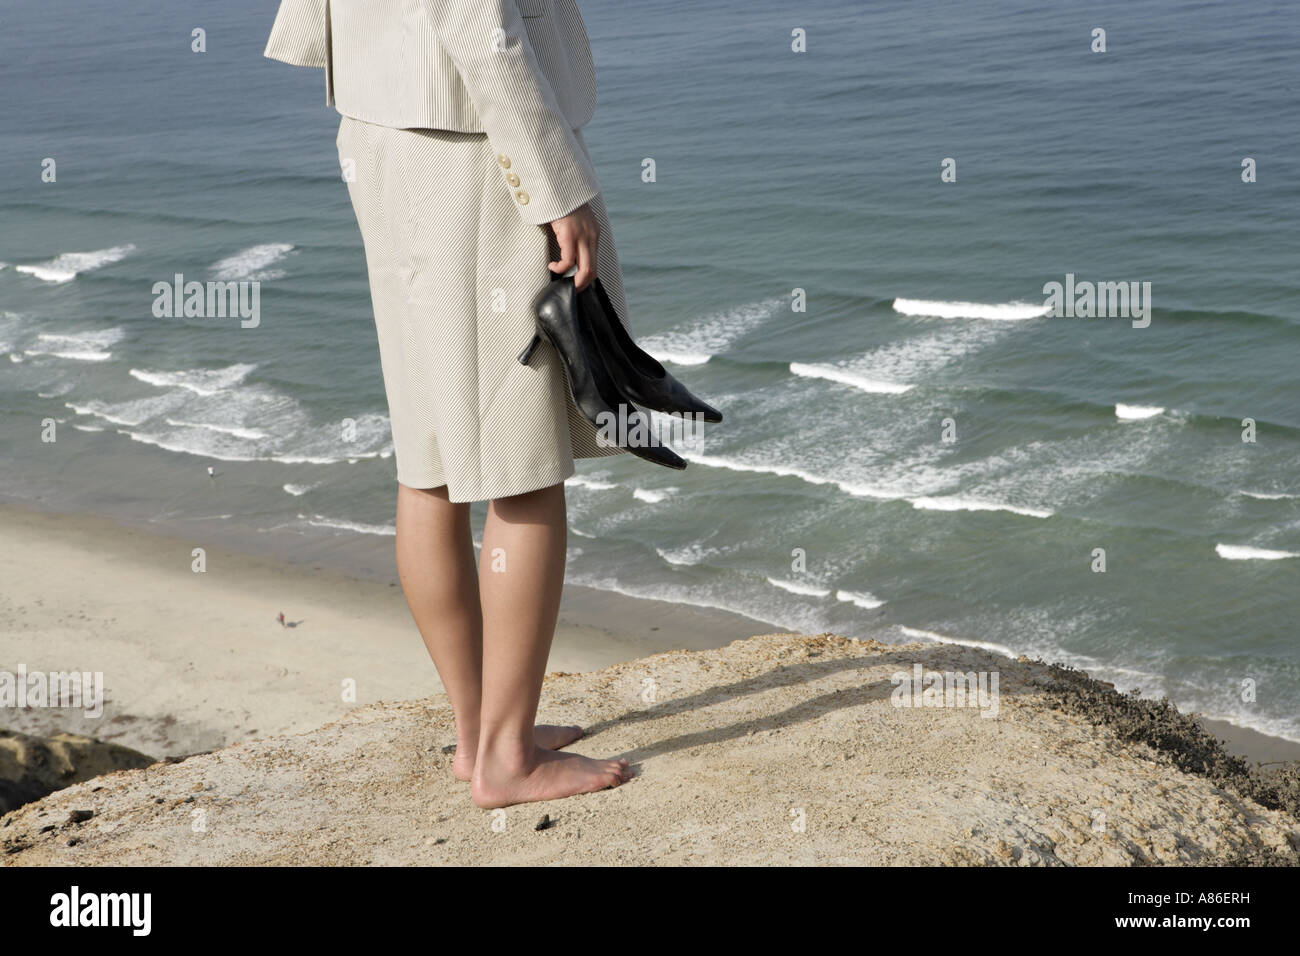 View of a woman standing on a cliff. Stock Photo